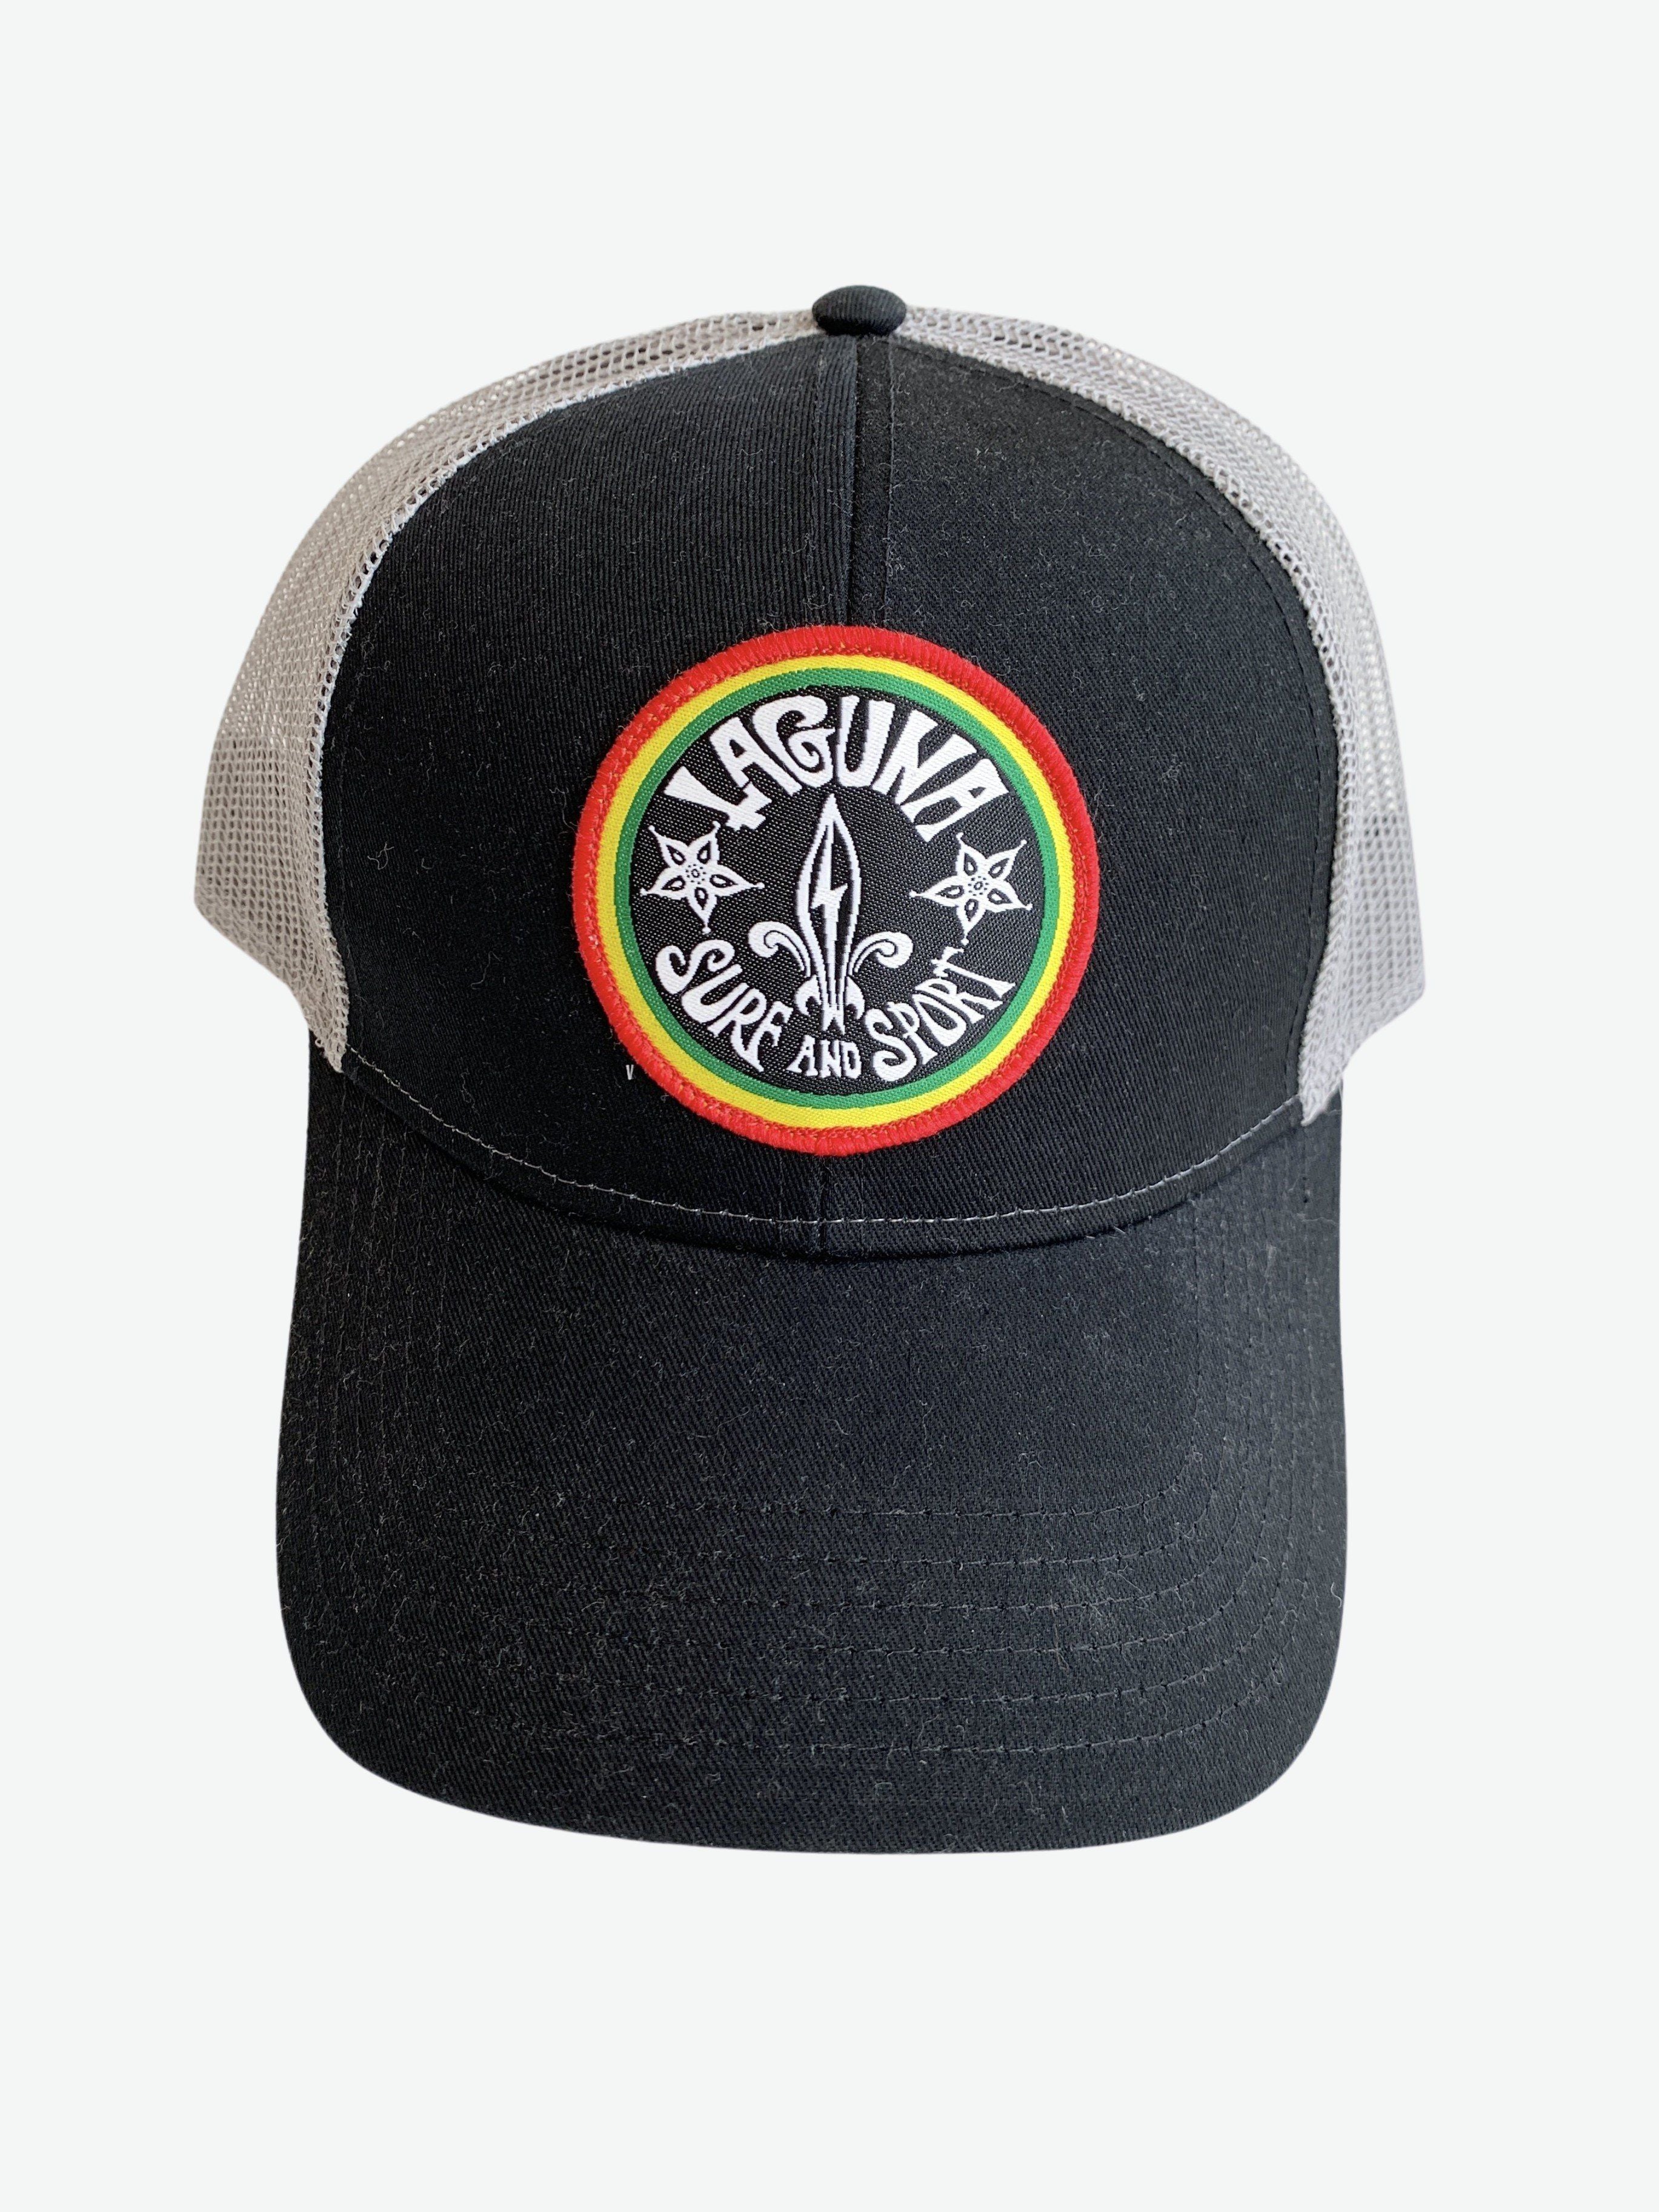 CIRCLE ROOTS Twill/Mesh Patch Ball Cap